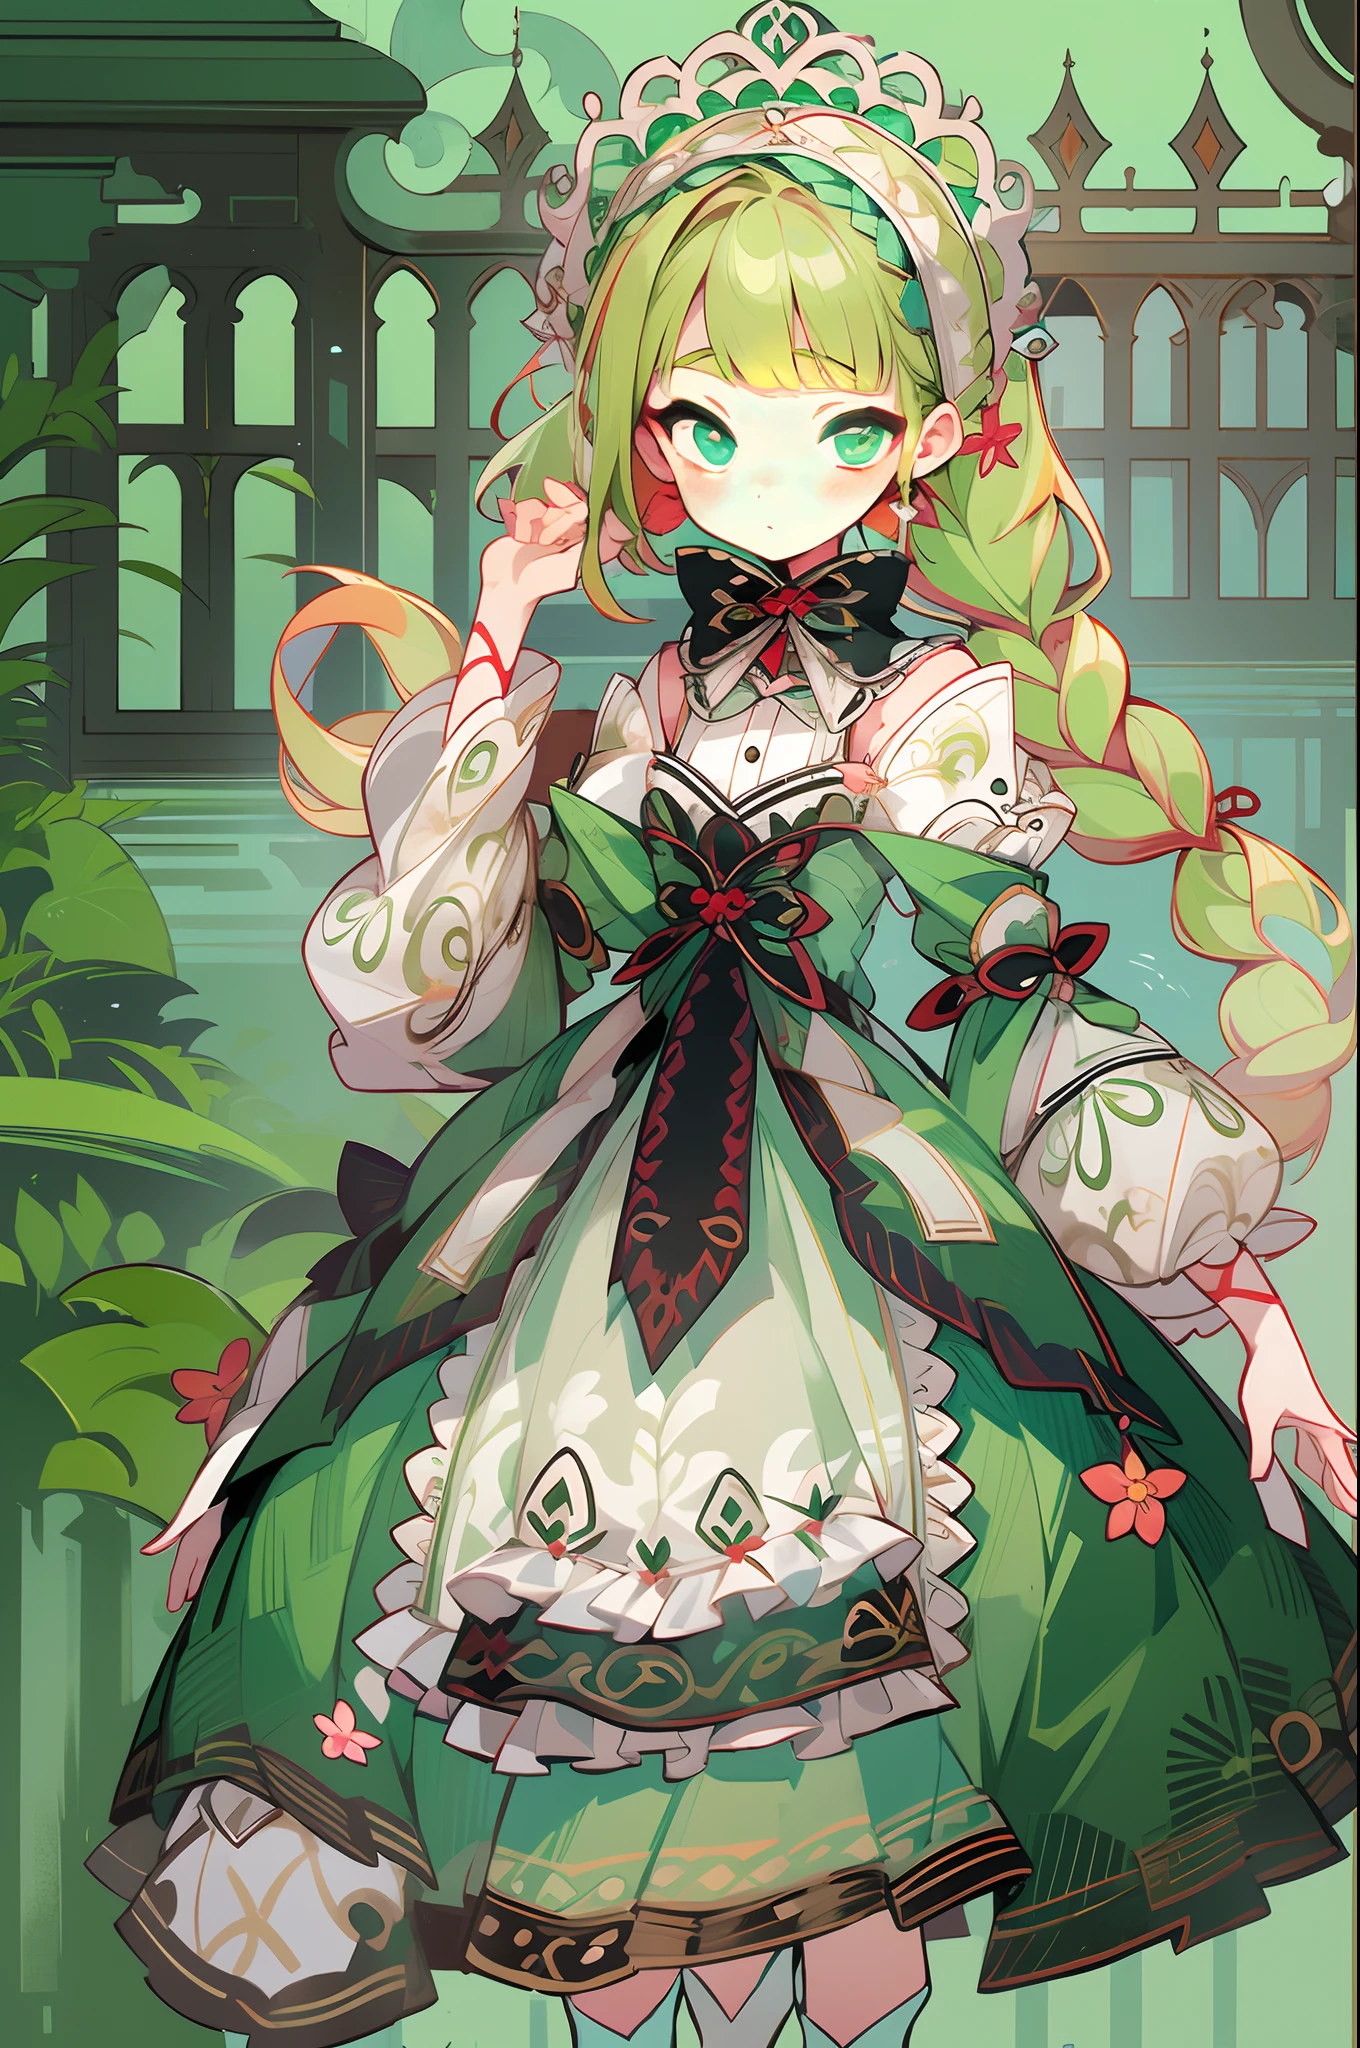 (1 Gothic Lolita), (standing full-body), (Full body standing painting), 1 Princess，(standing full-body)，solo, BJD dolls, Blush, long  skirt，character  design, fanciful, alice in the wonderland, Gothic Lolita red dress, Green high socks, White flowers, ((red colour)), Blonde hair, Short hair, Double up braid, tmasterpiece, top Quority，best qualtiy，Ultra-high resolution，Exquisite facial features,